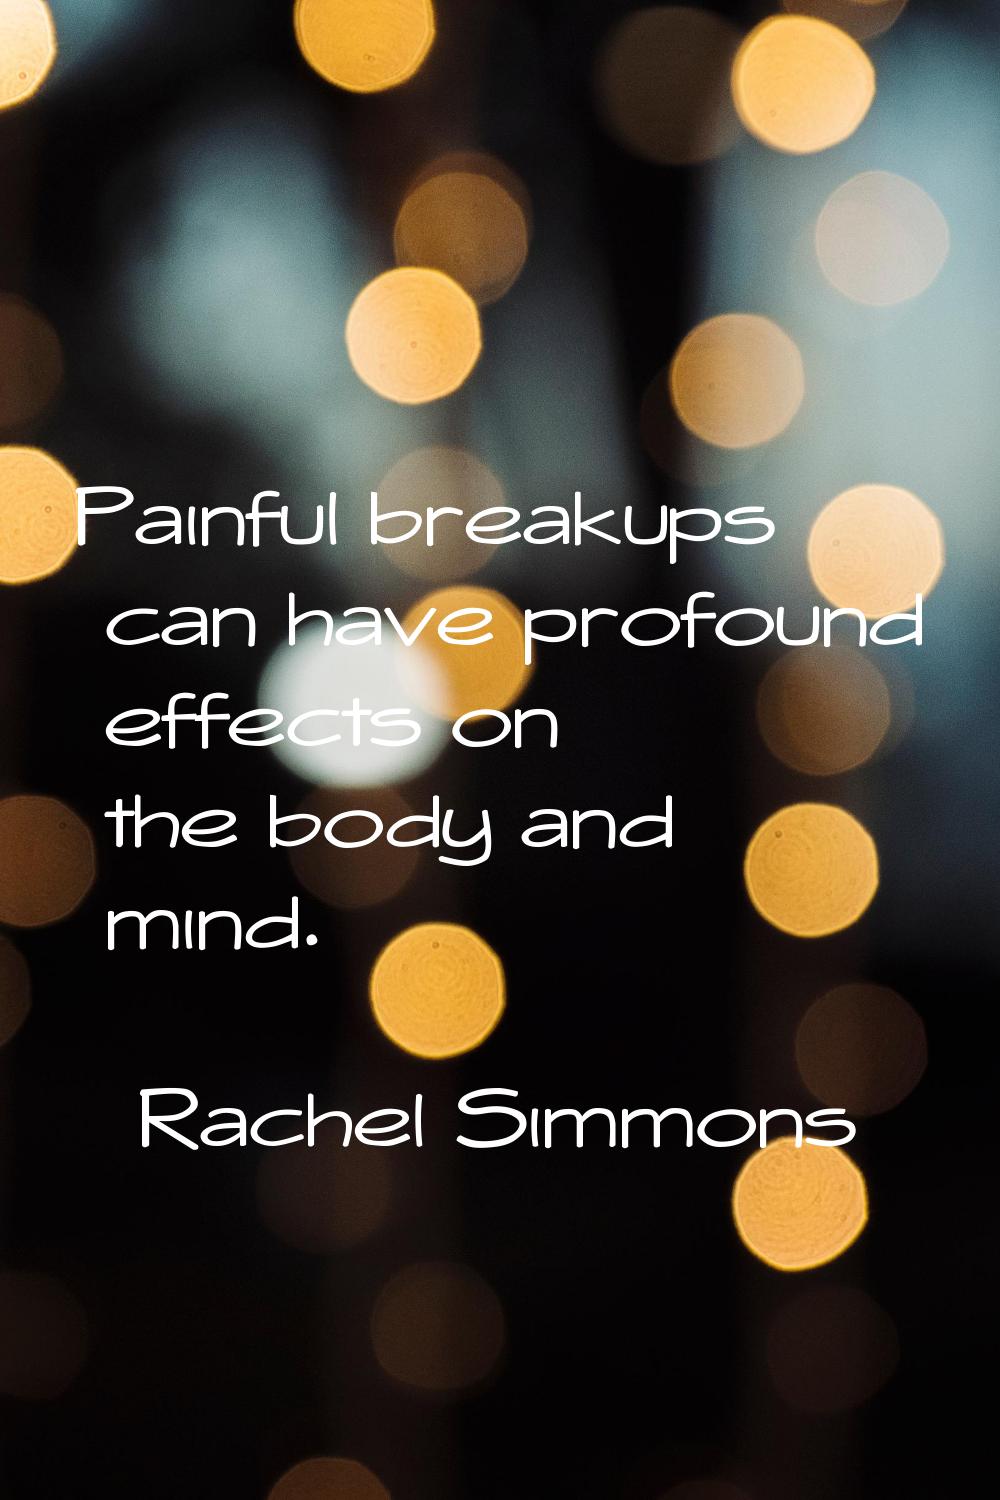 Painful breakups can have profound effects on the body and mind.